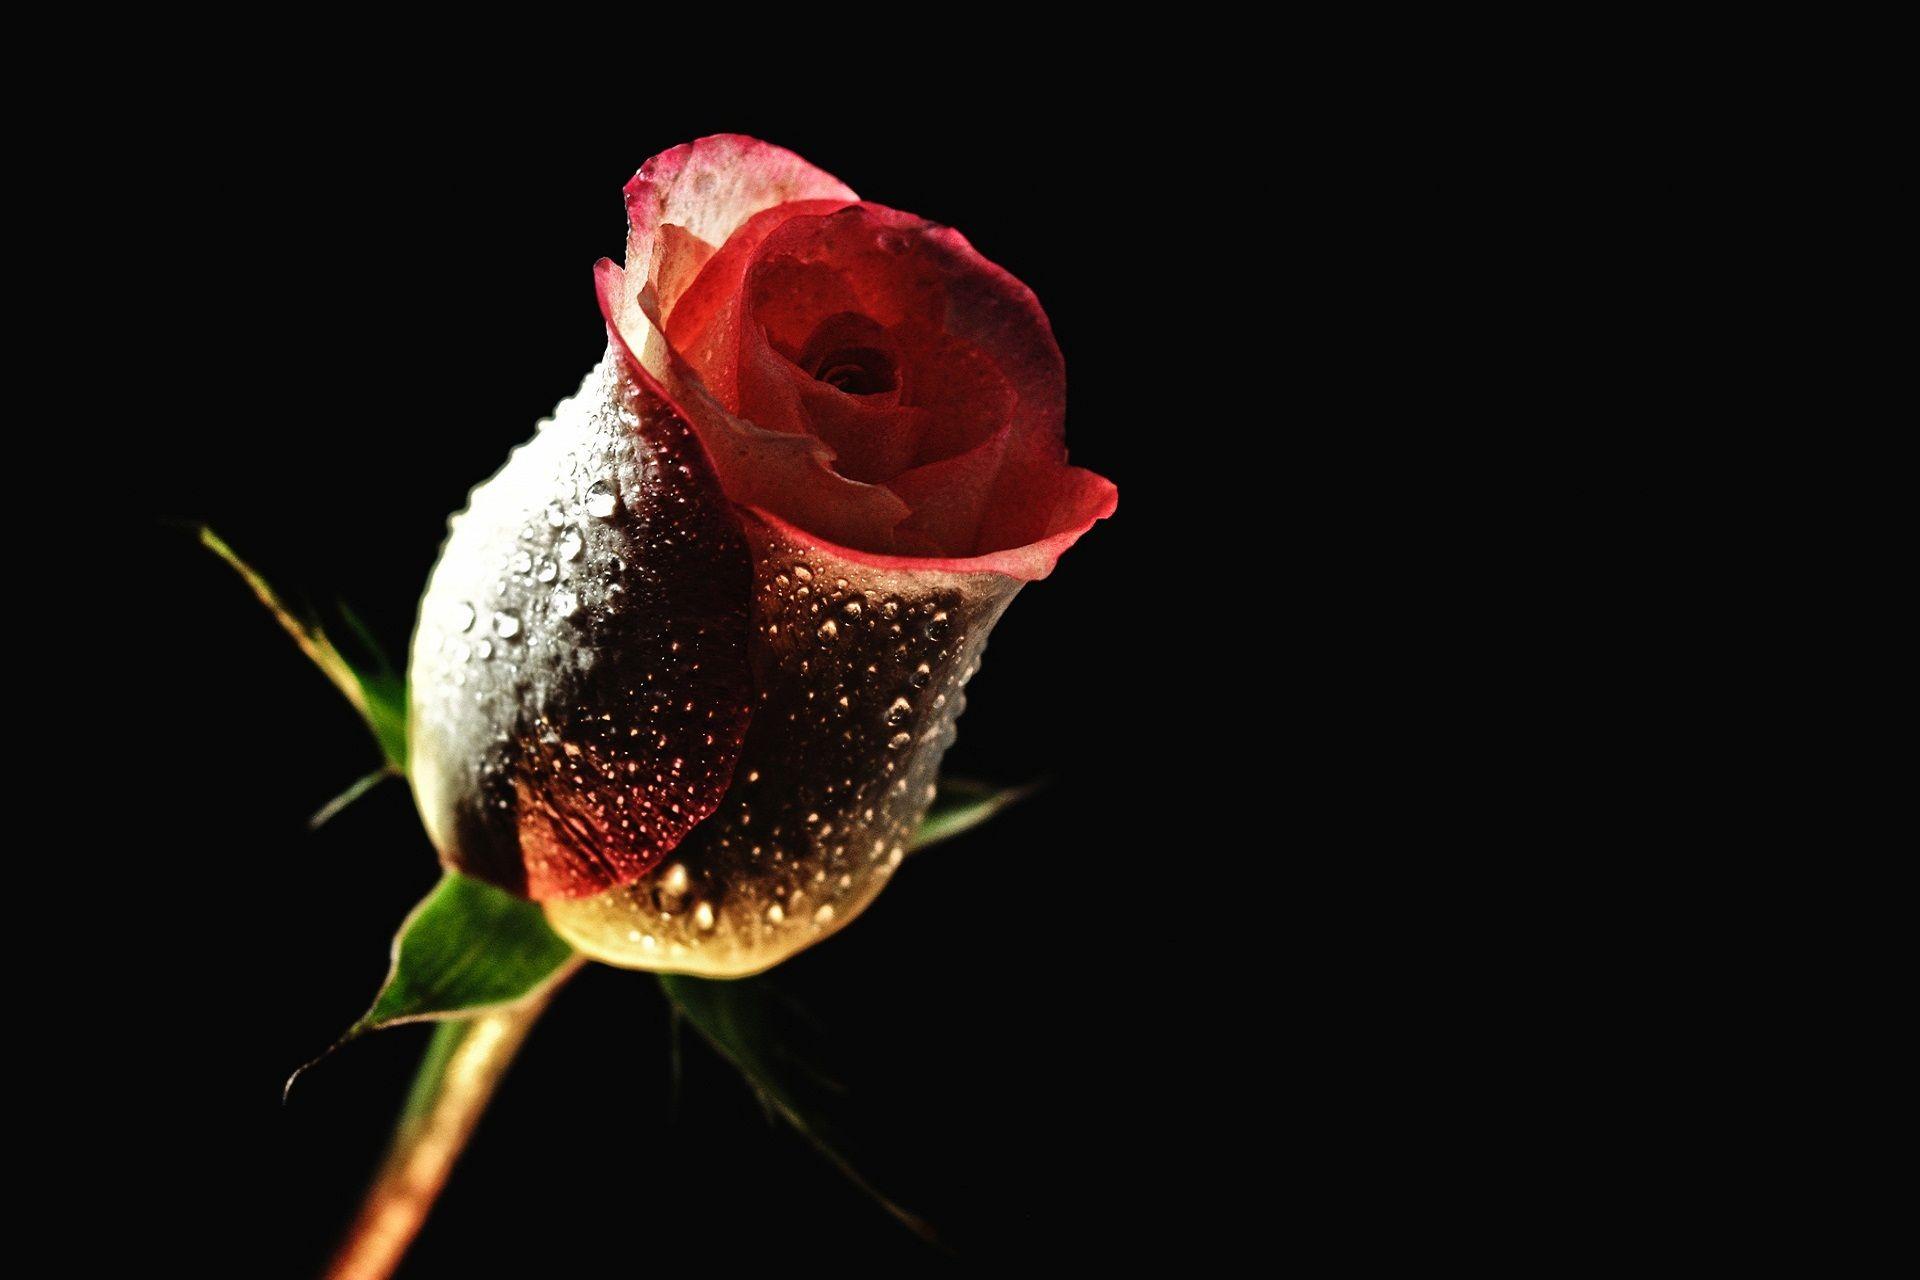 Full HD For Hoontoidly Rose Love Wallpaper Good Night Red With Black